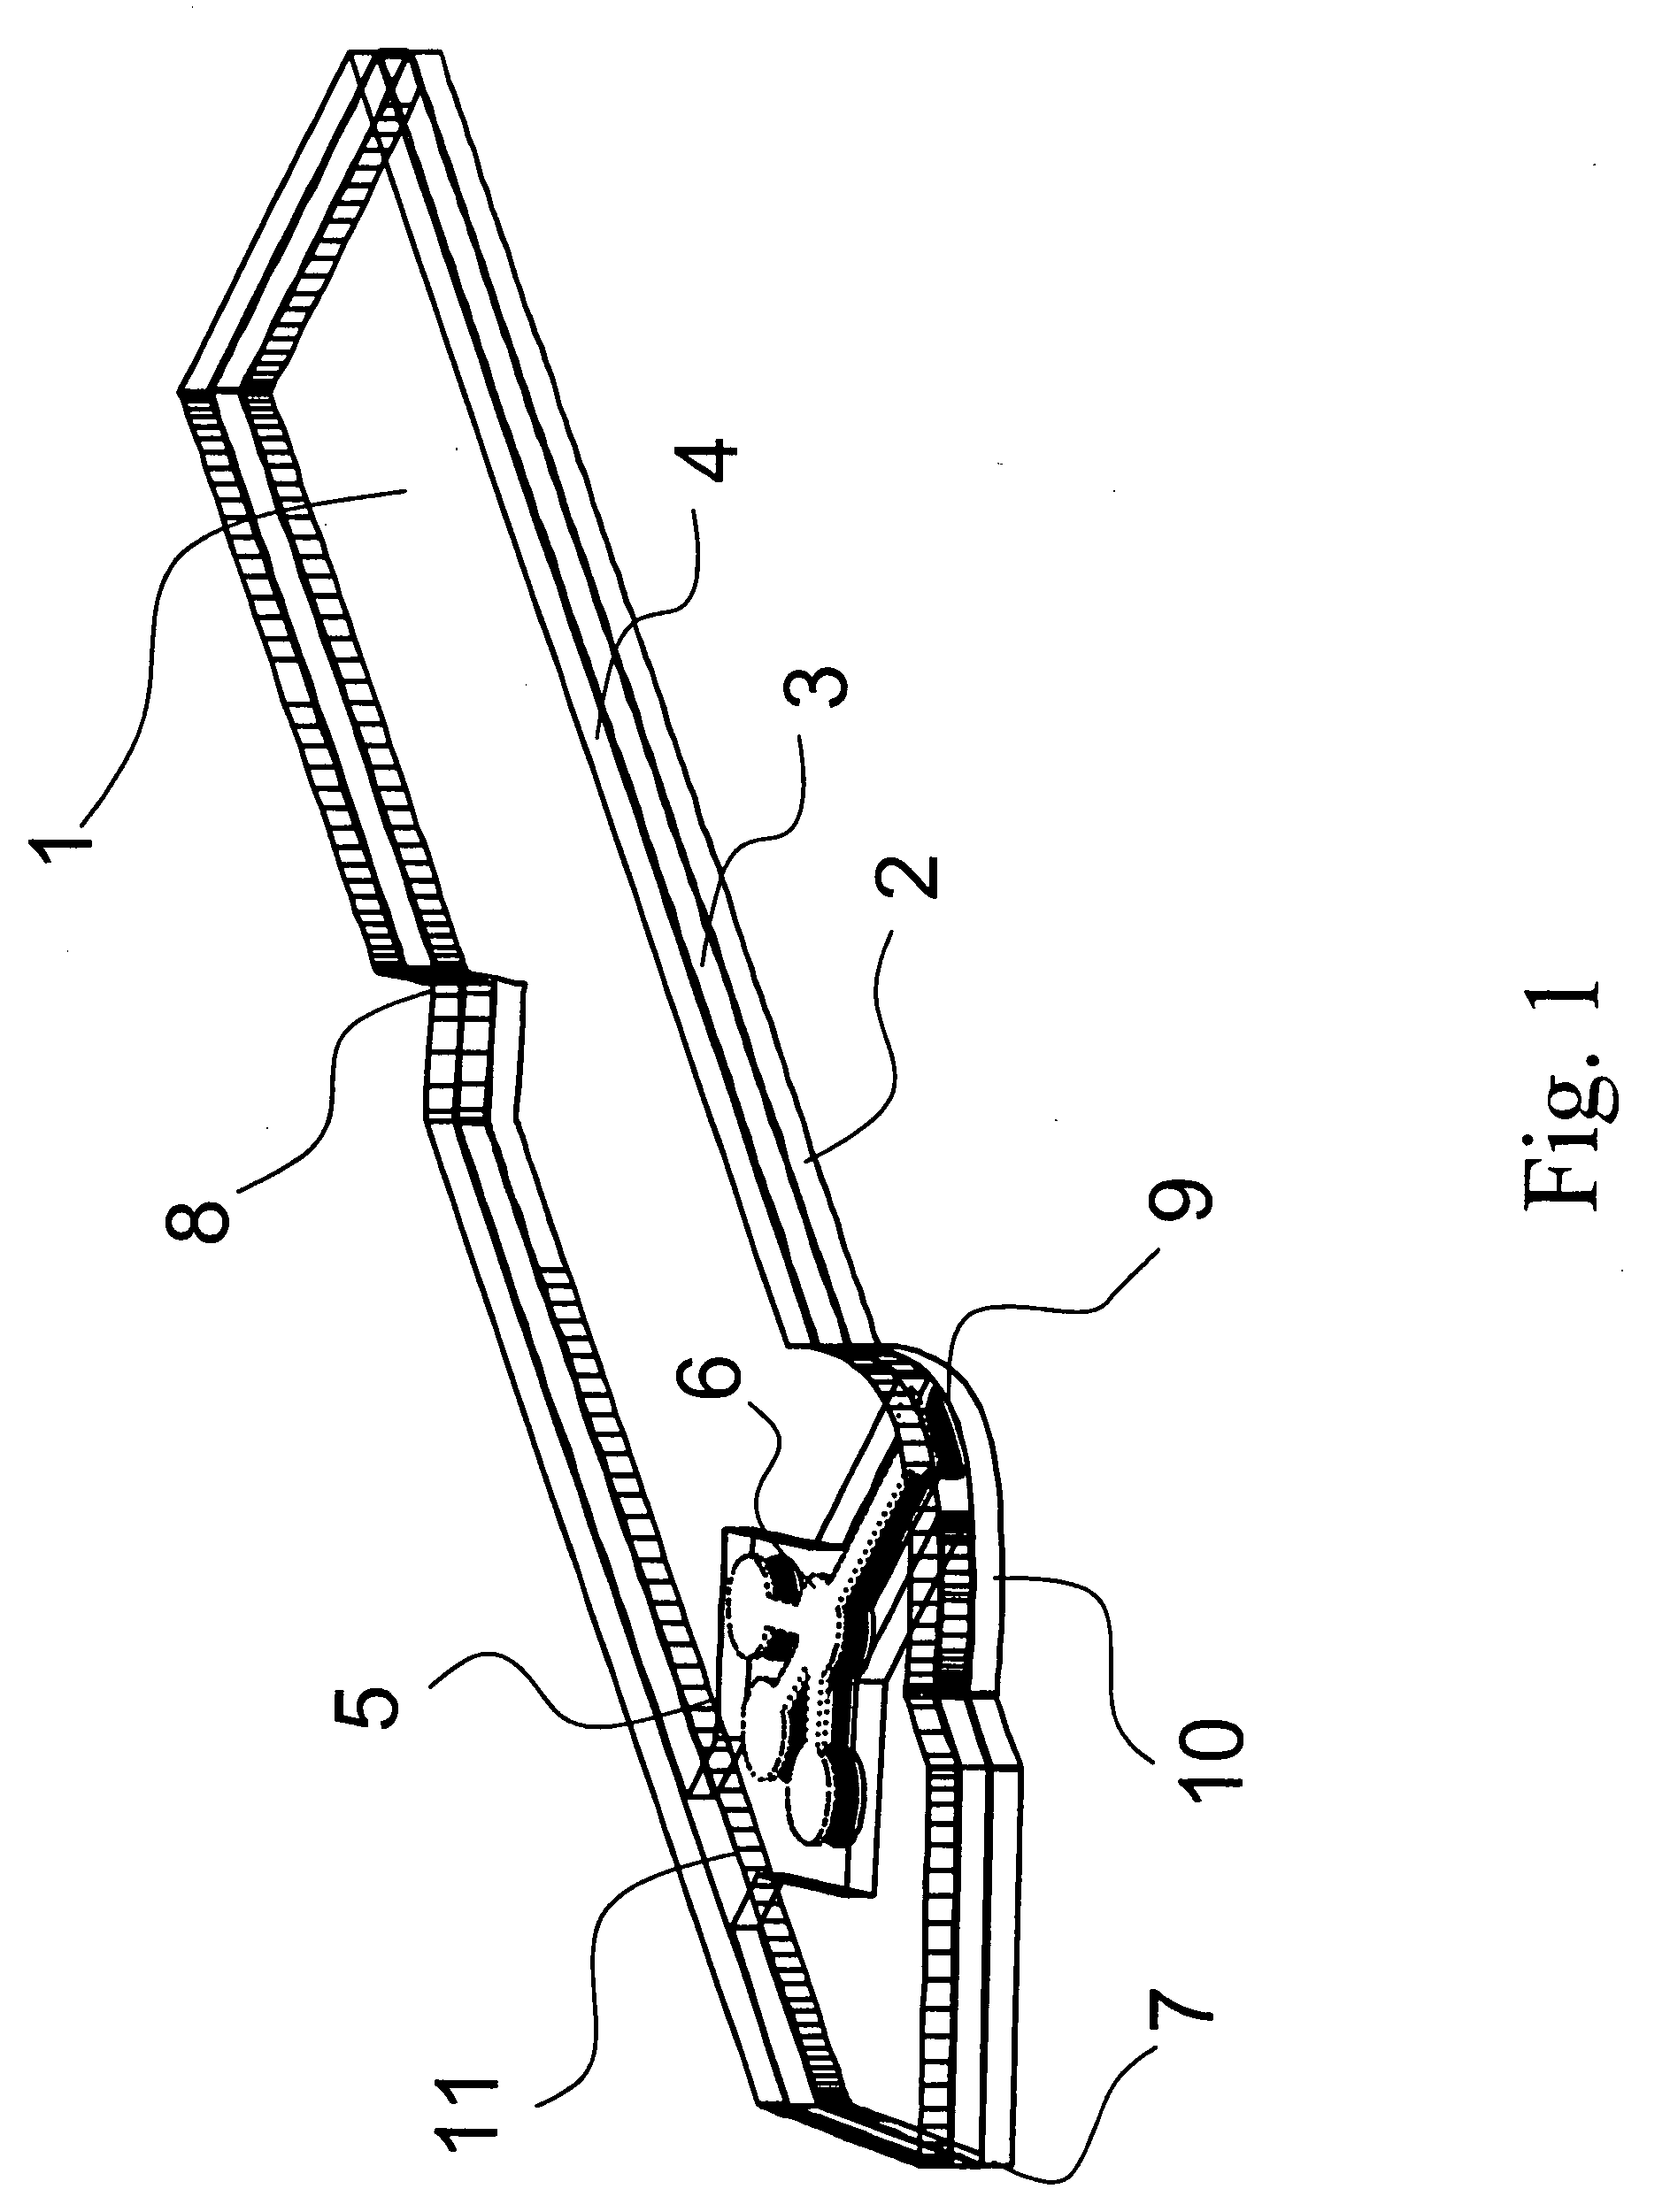 Analyte test system for determining the concentration of an analyte in a physiological or aqueous fluid